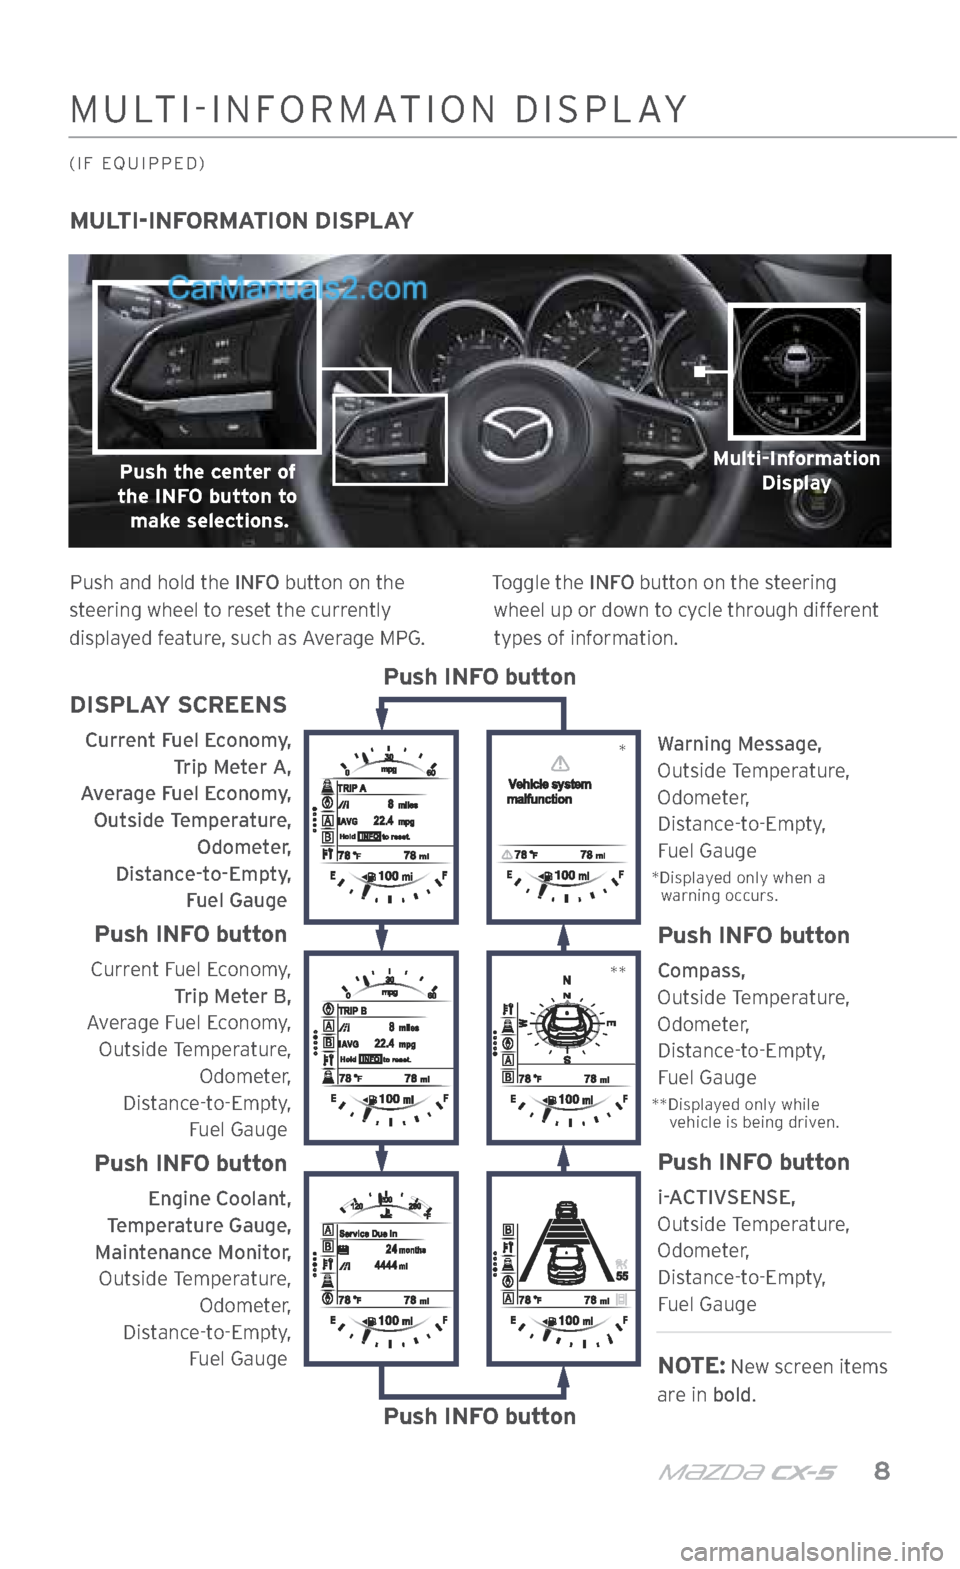 MAZDA MODEL CX-5 2017  Smart Start Guide (in English) m{zd{ cx-5    8
MULTI-INFORMATION DISPLAY 
Push and hold the INFO button on the 
steering wheel to reset the currently 
displayed feature, such as Average MPG. Toggle the INFO button on the steering 
